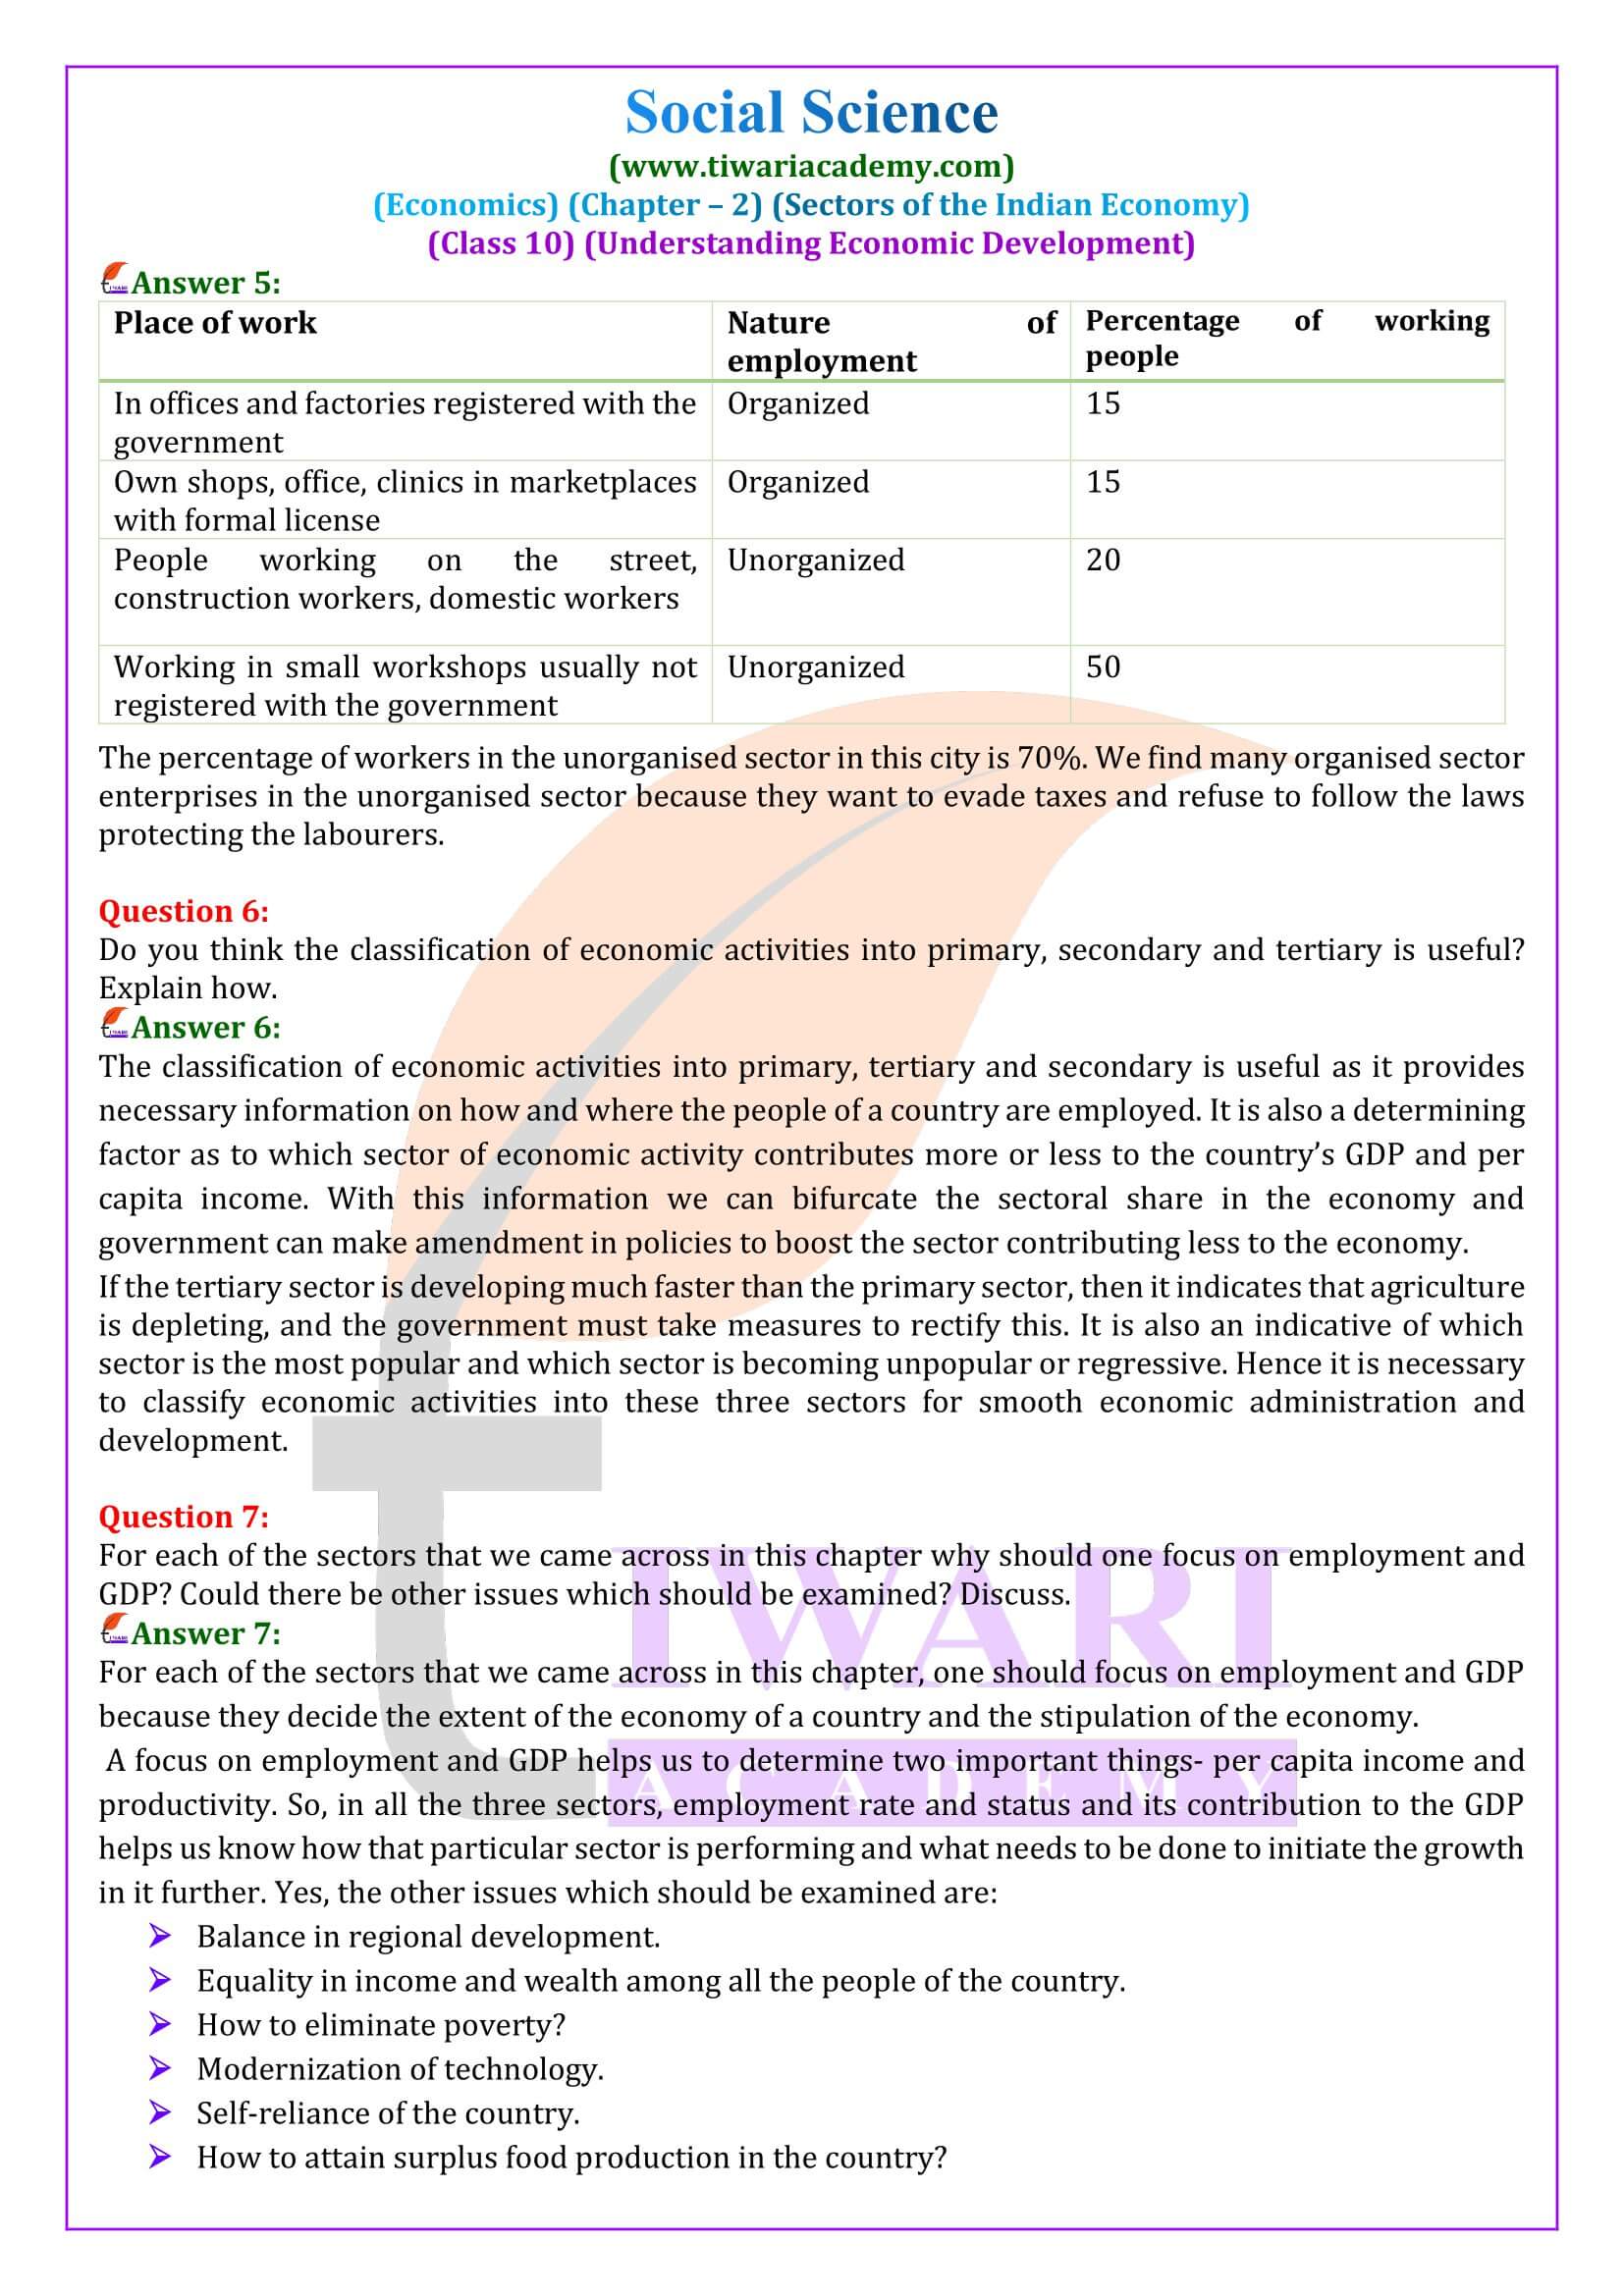 NCERT Solutions for Class 10 Economics Chapter 2 in English Medium